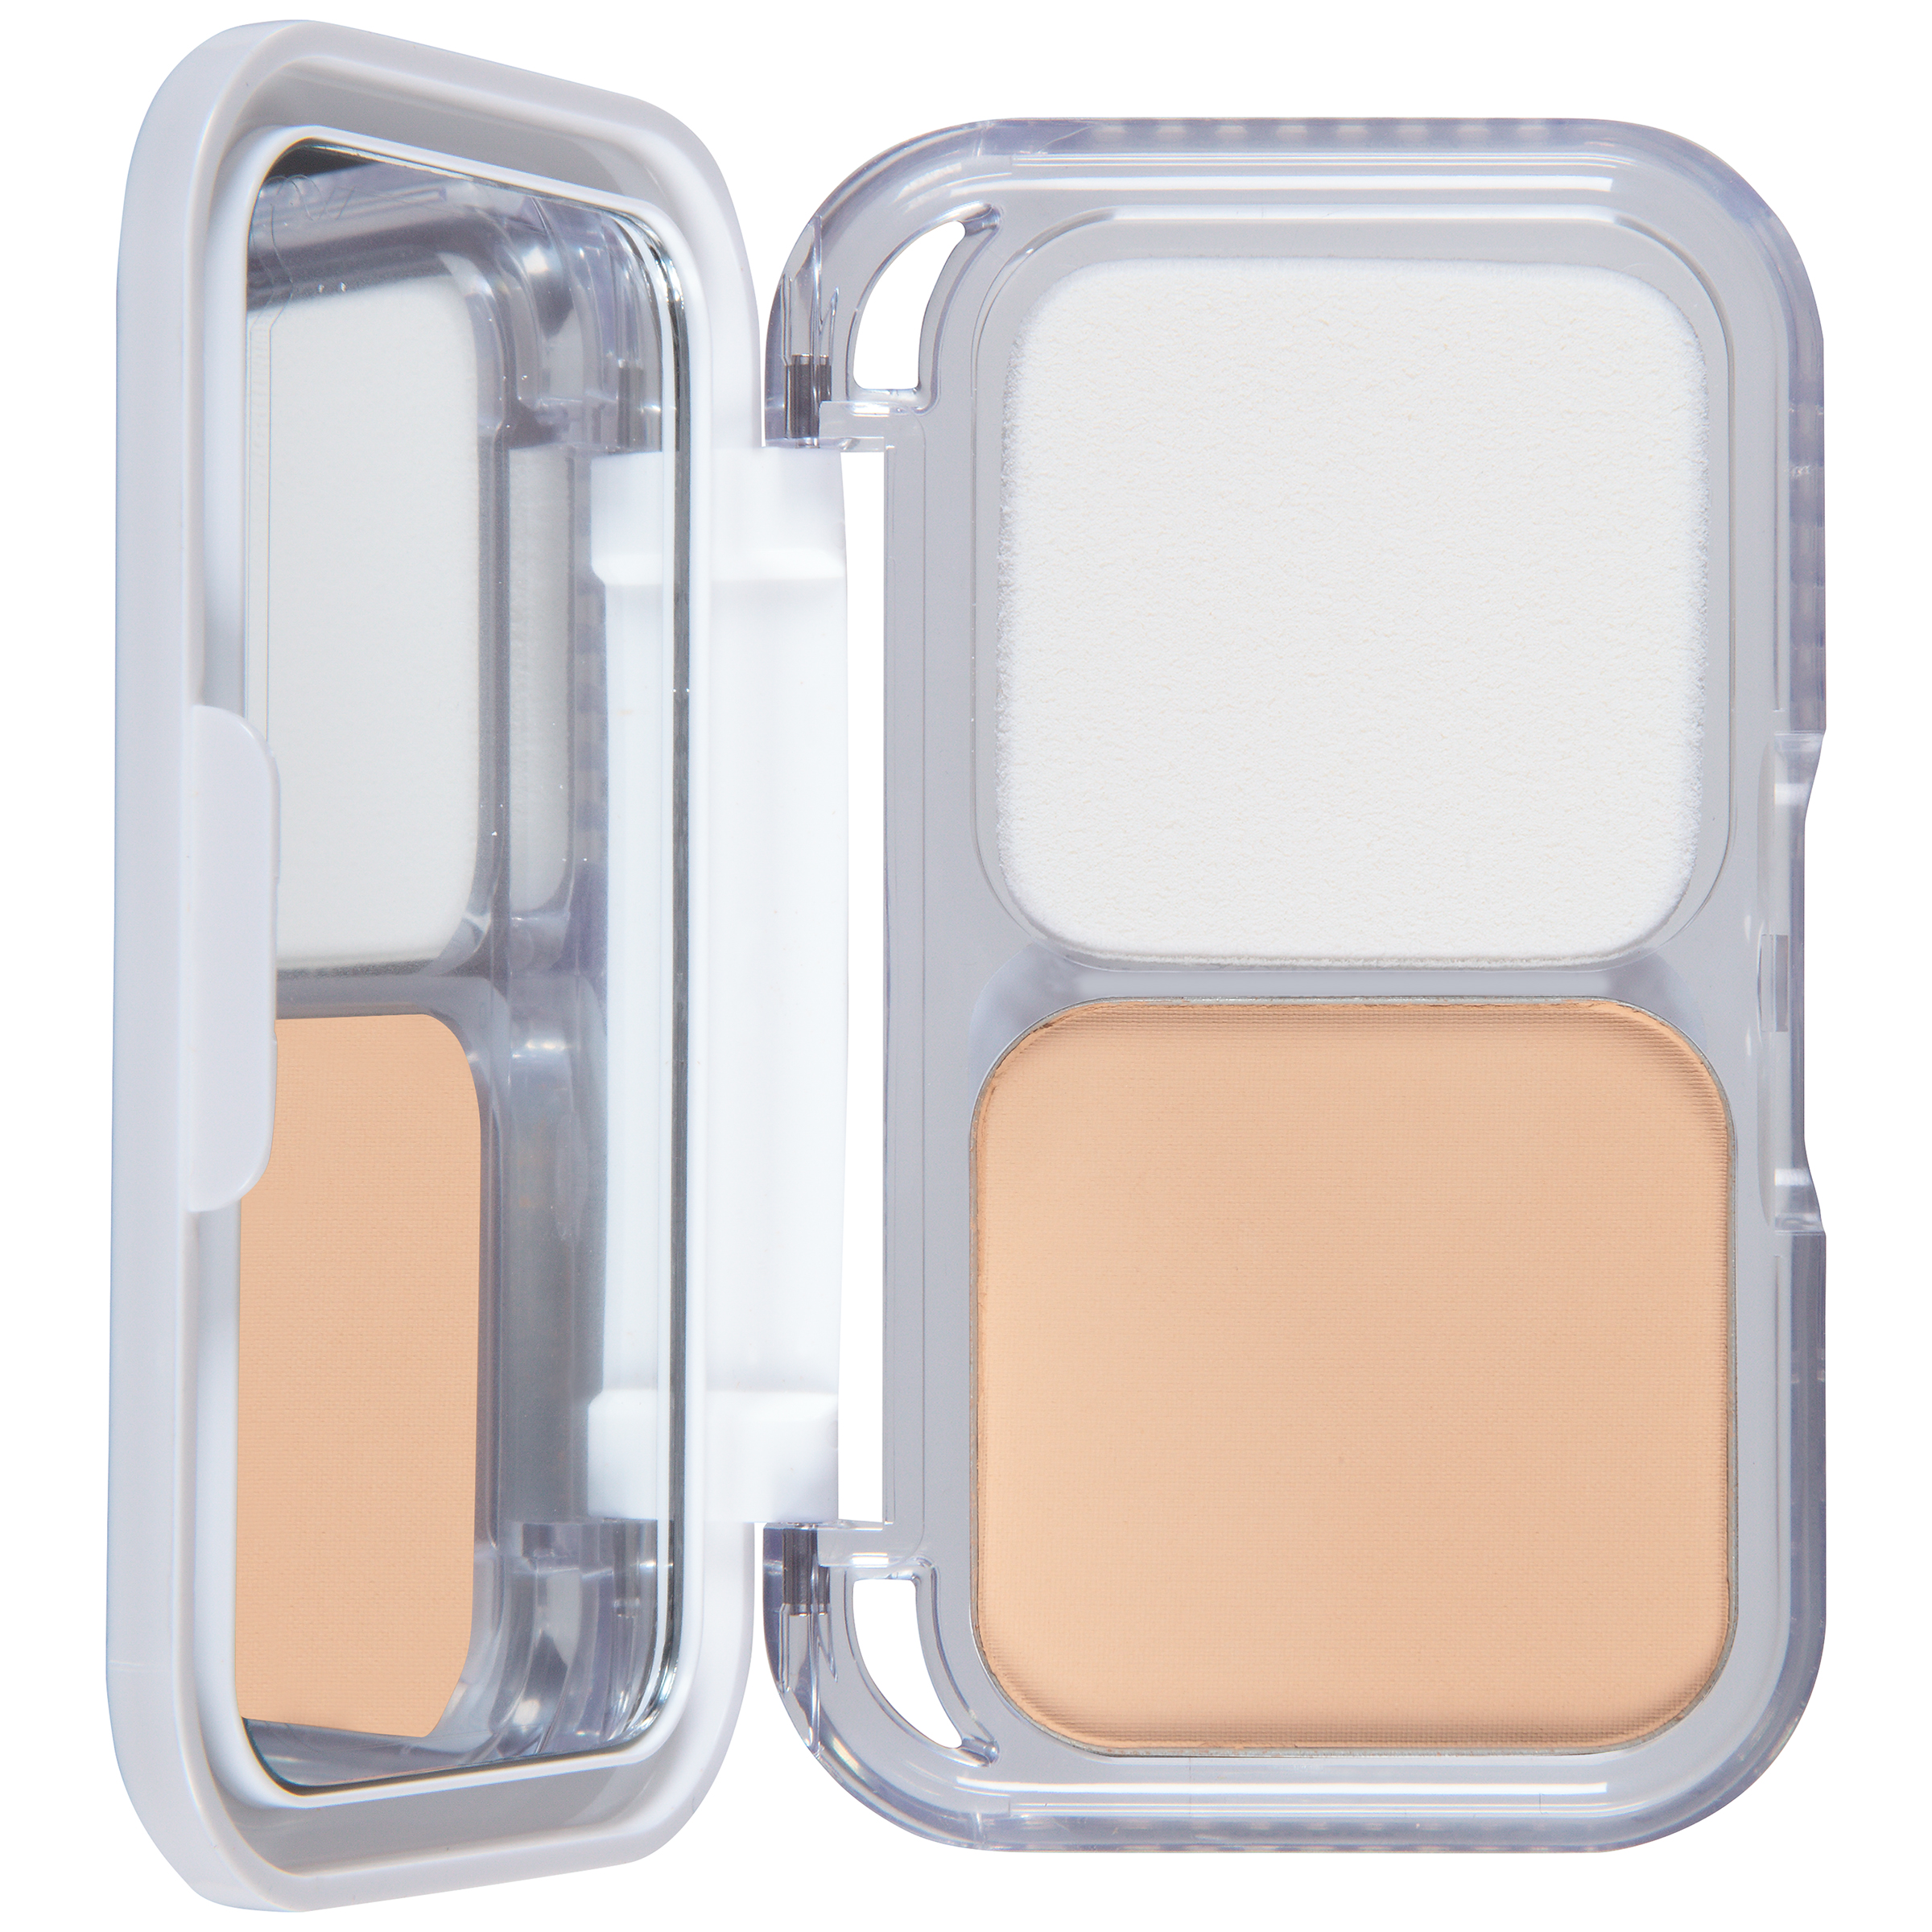 Maybelline Super Stay Better Skin Powder, Warm Nude - image 4 of 4